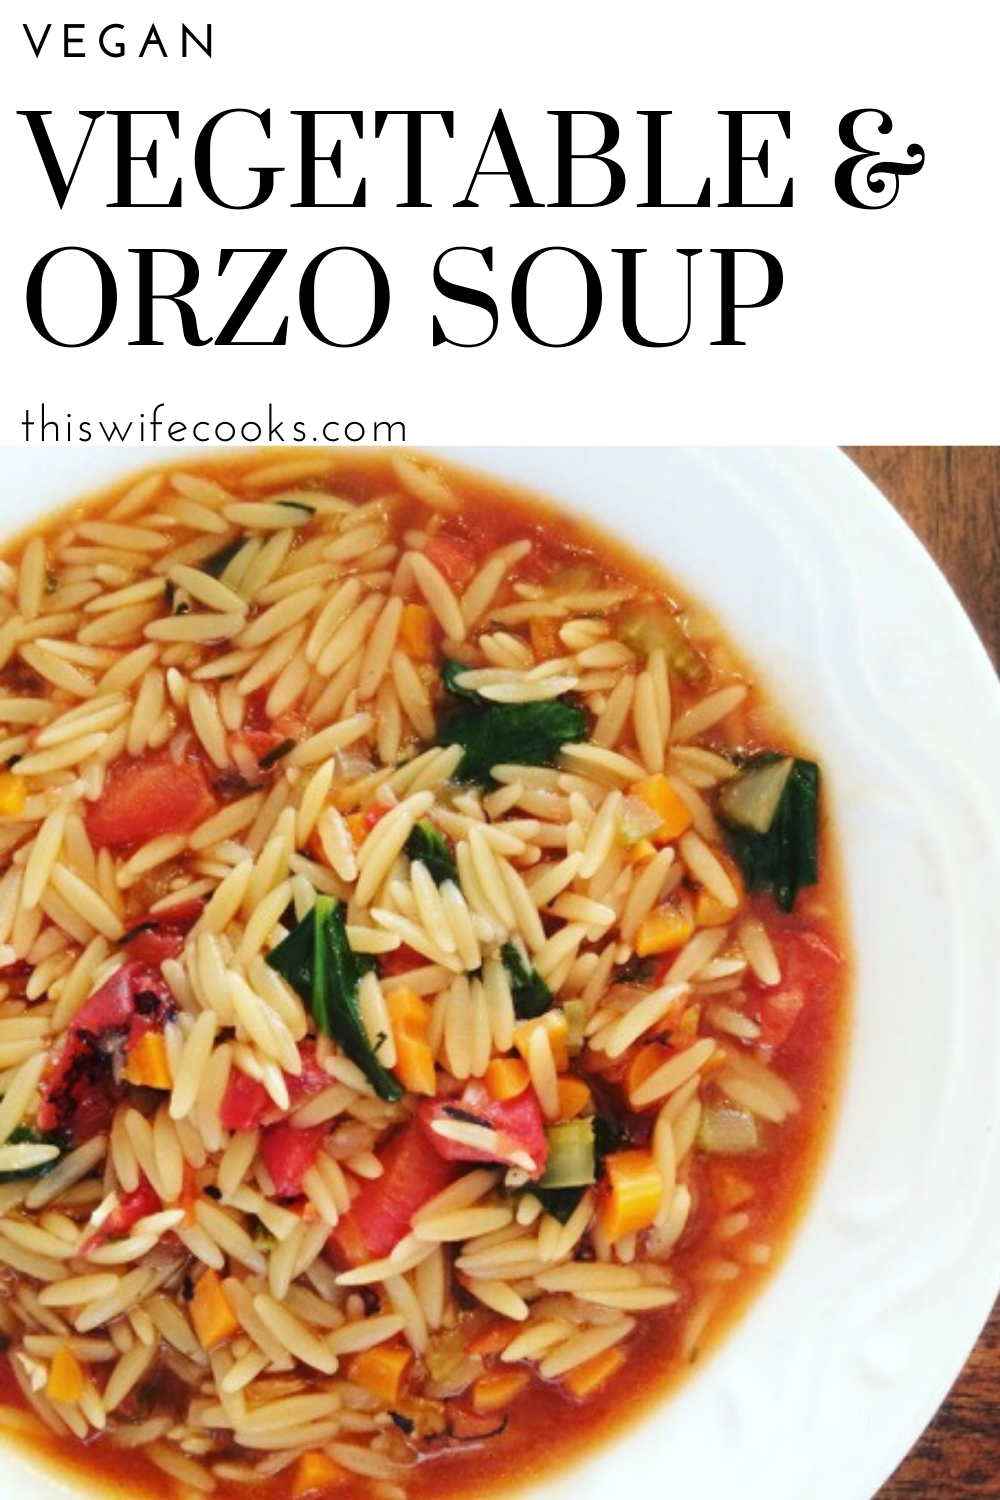 Vegan Vegetable and Orzo Soup - A hearty and colorful soup loaded with orzo pasta and veggies. Ready in under 30 minutes! via @thiswifecooks